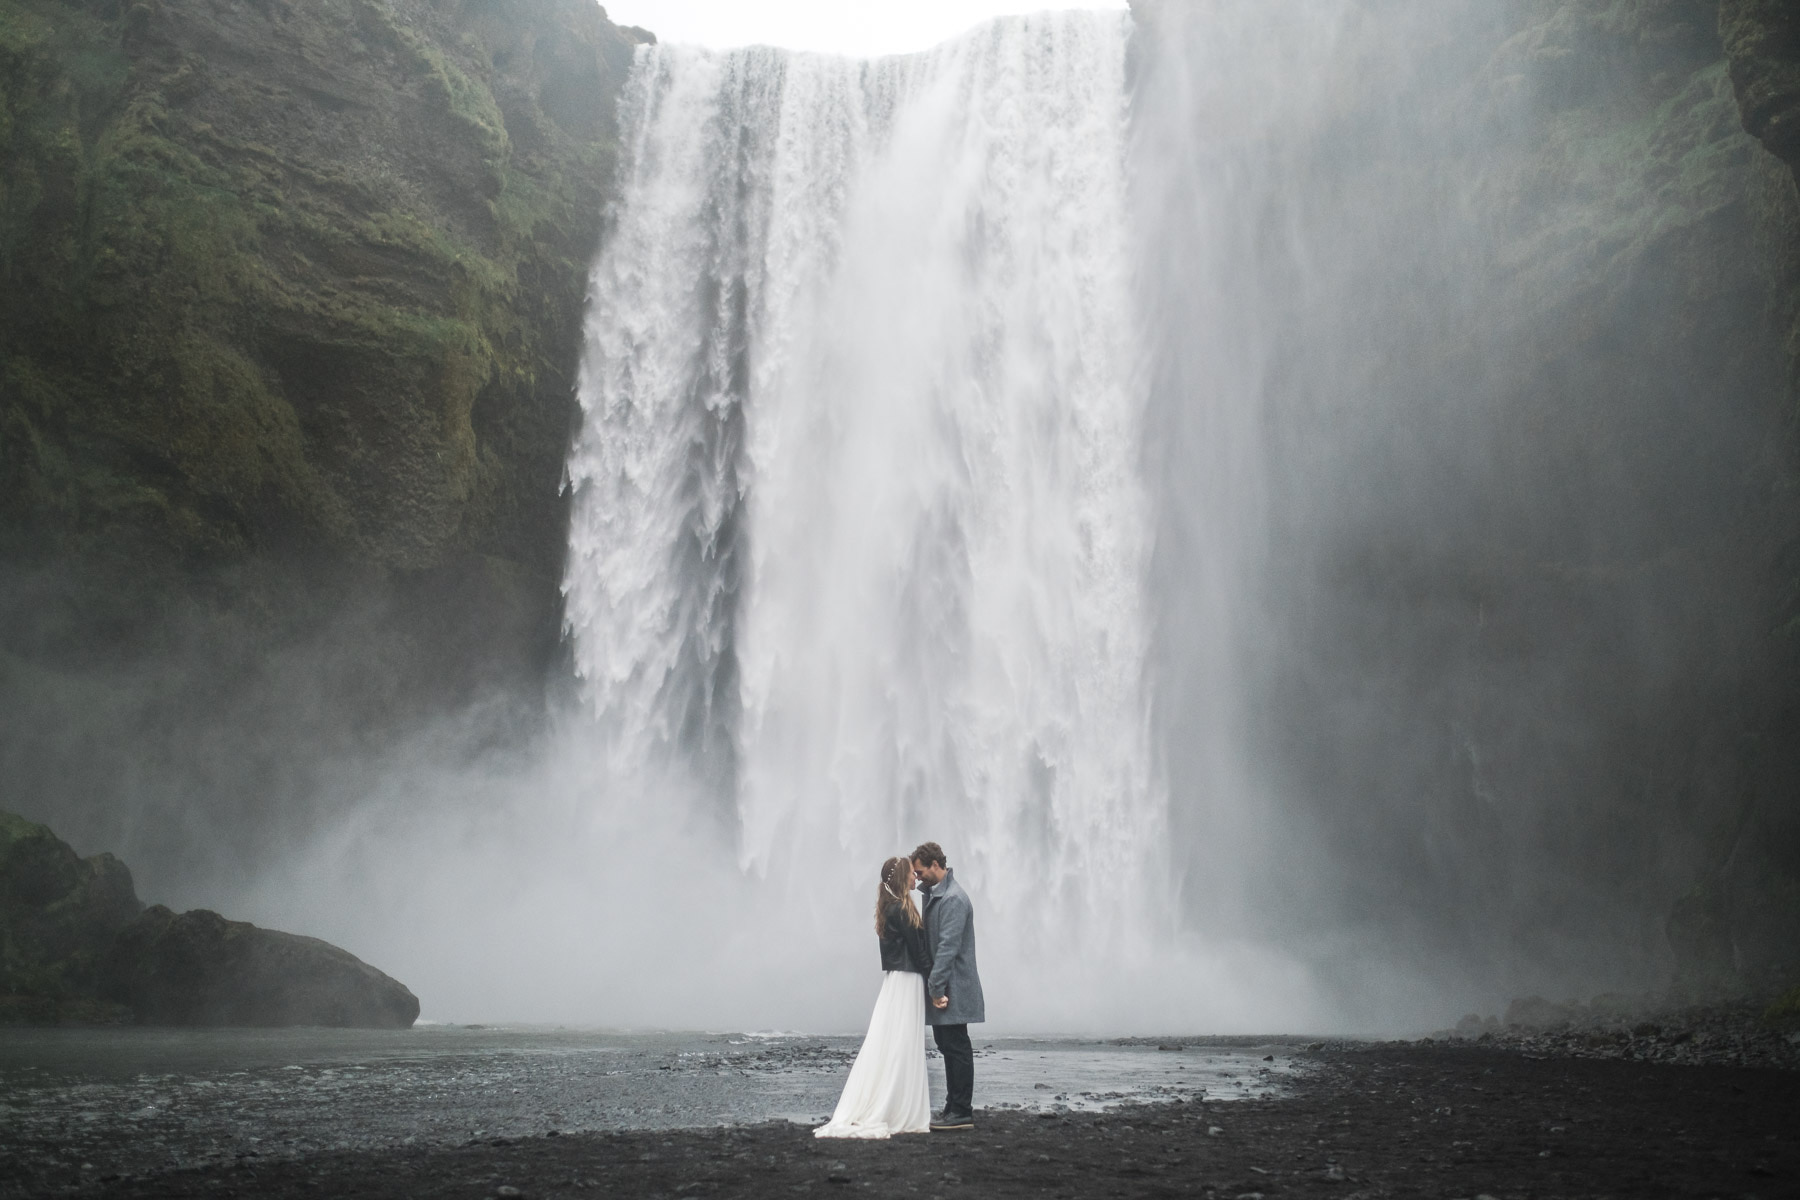 Dreamy Iceland South Coast adventure elopement at Skogafoss waterfall in Iceland